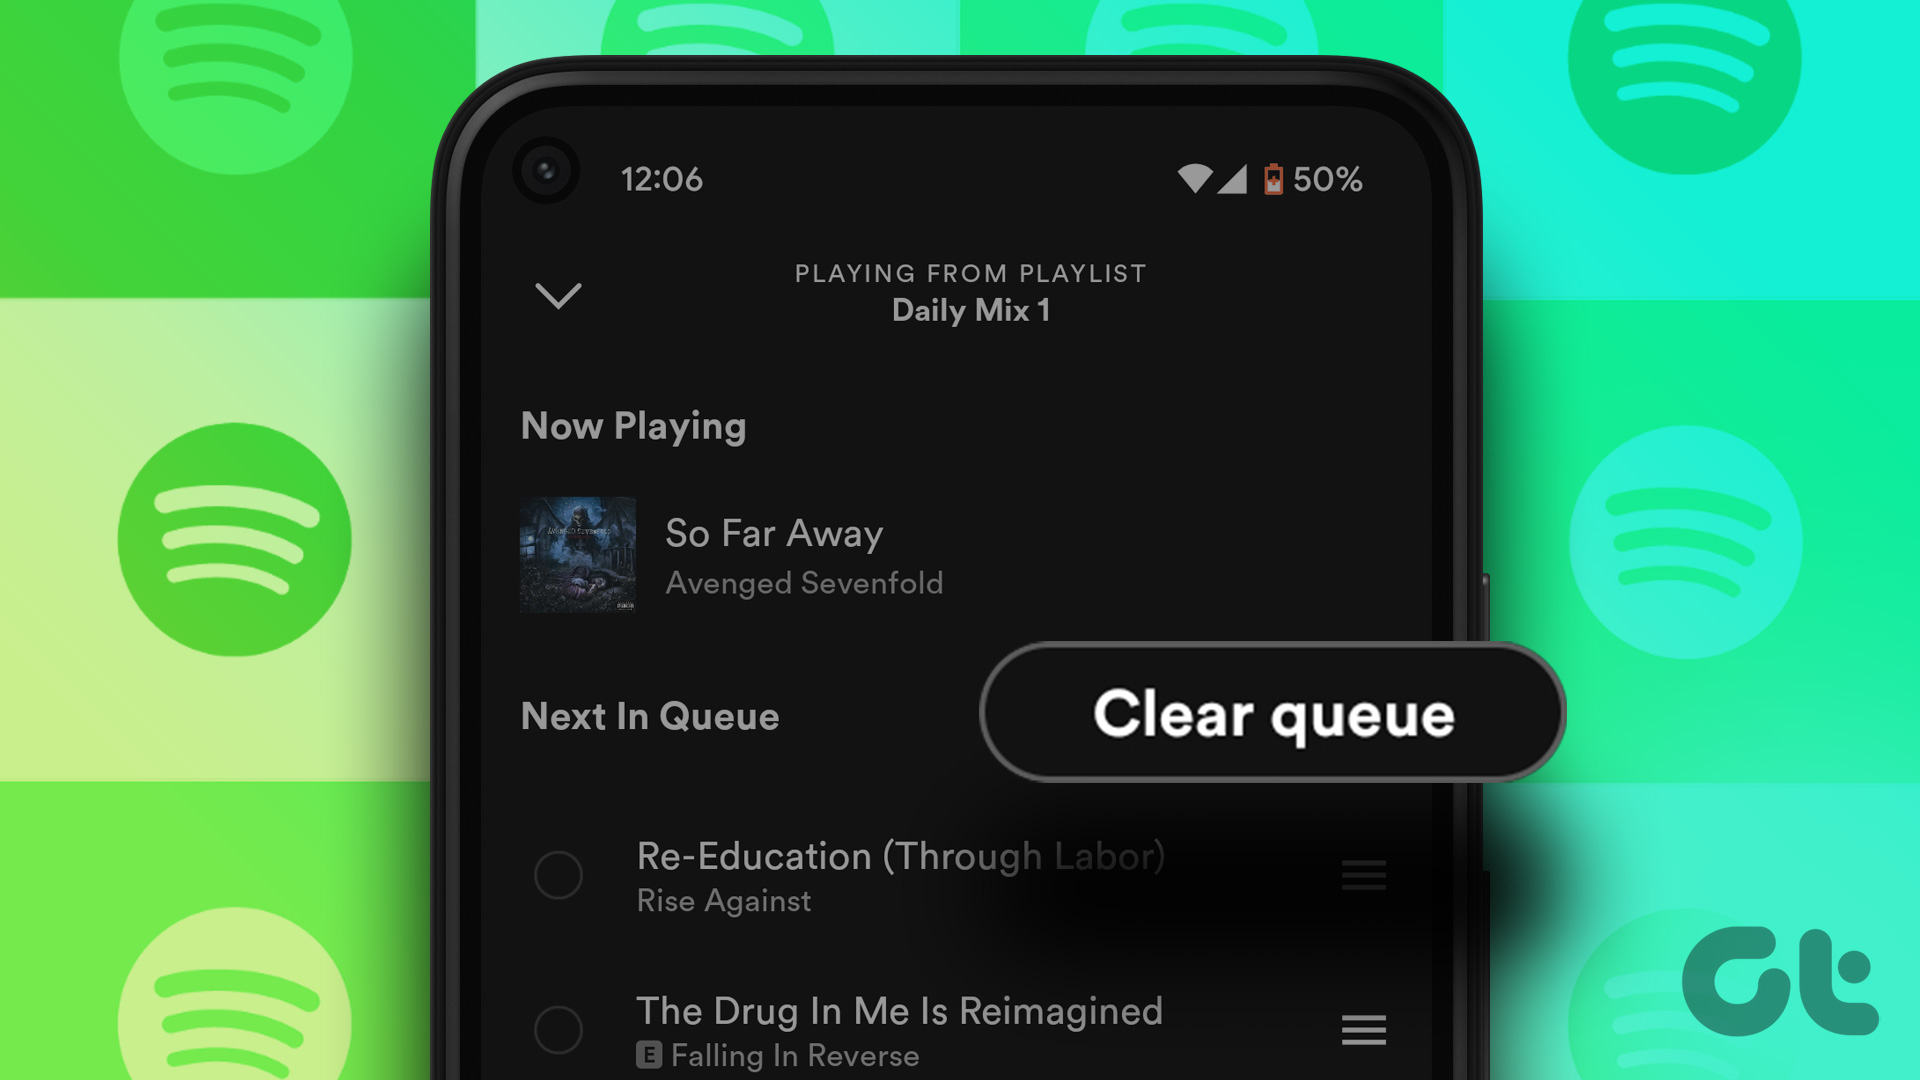 How to Clear Queue on Spotify